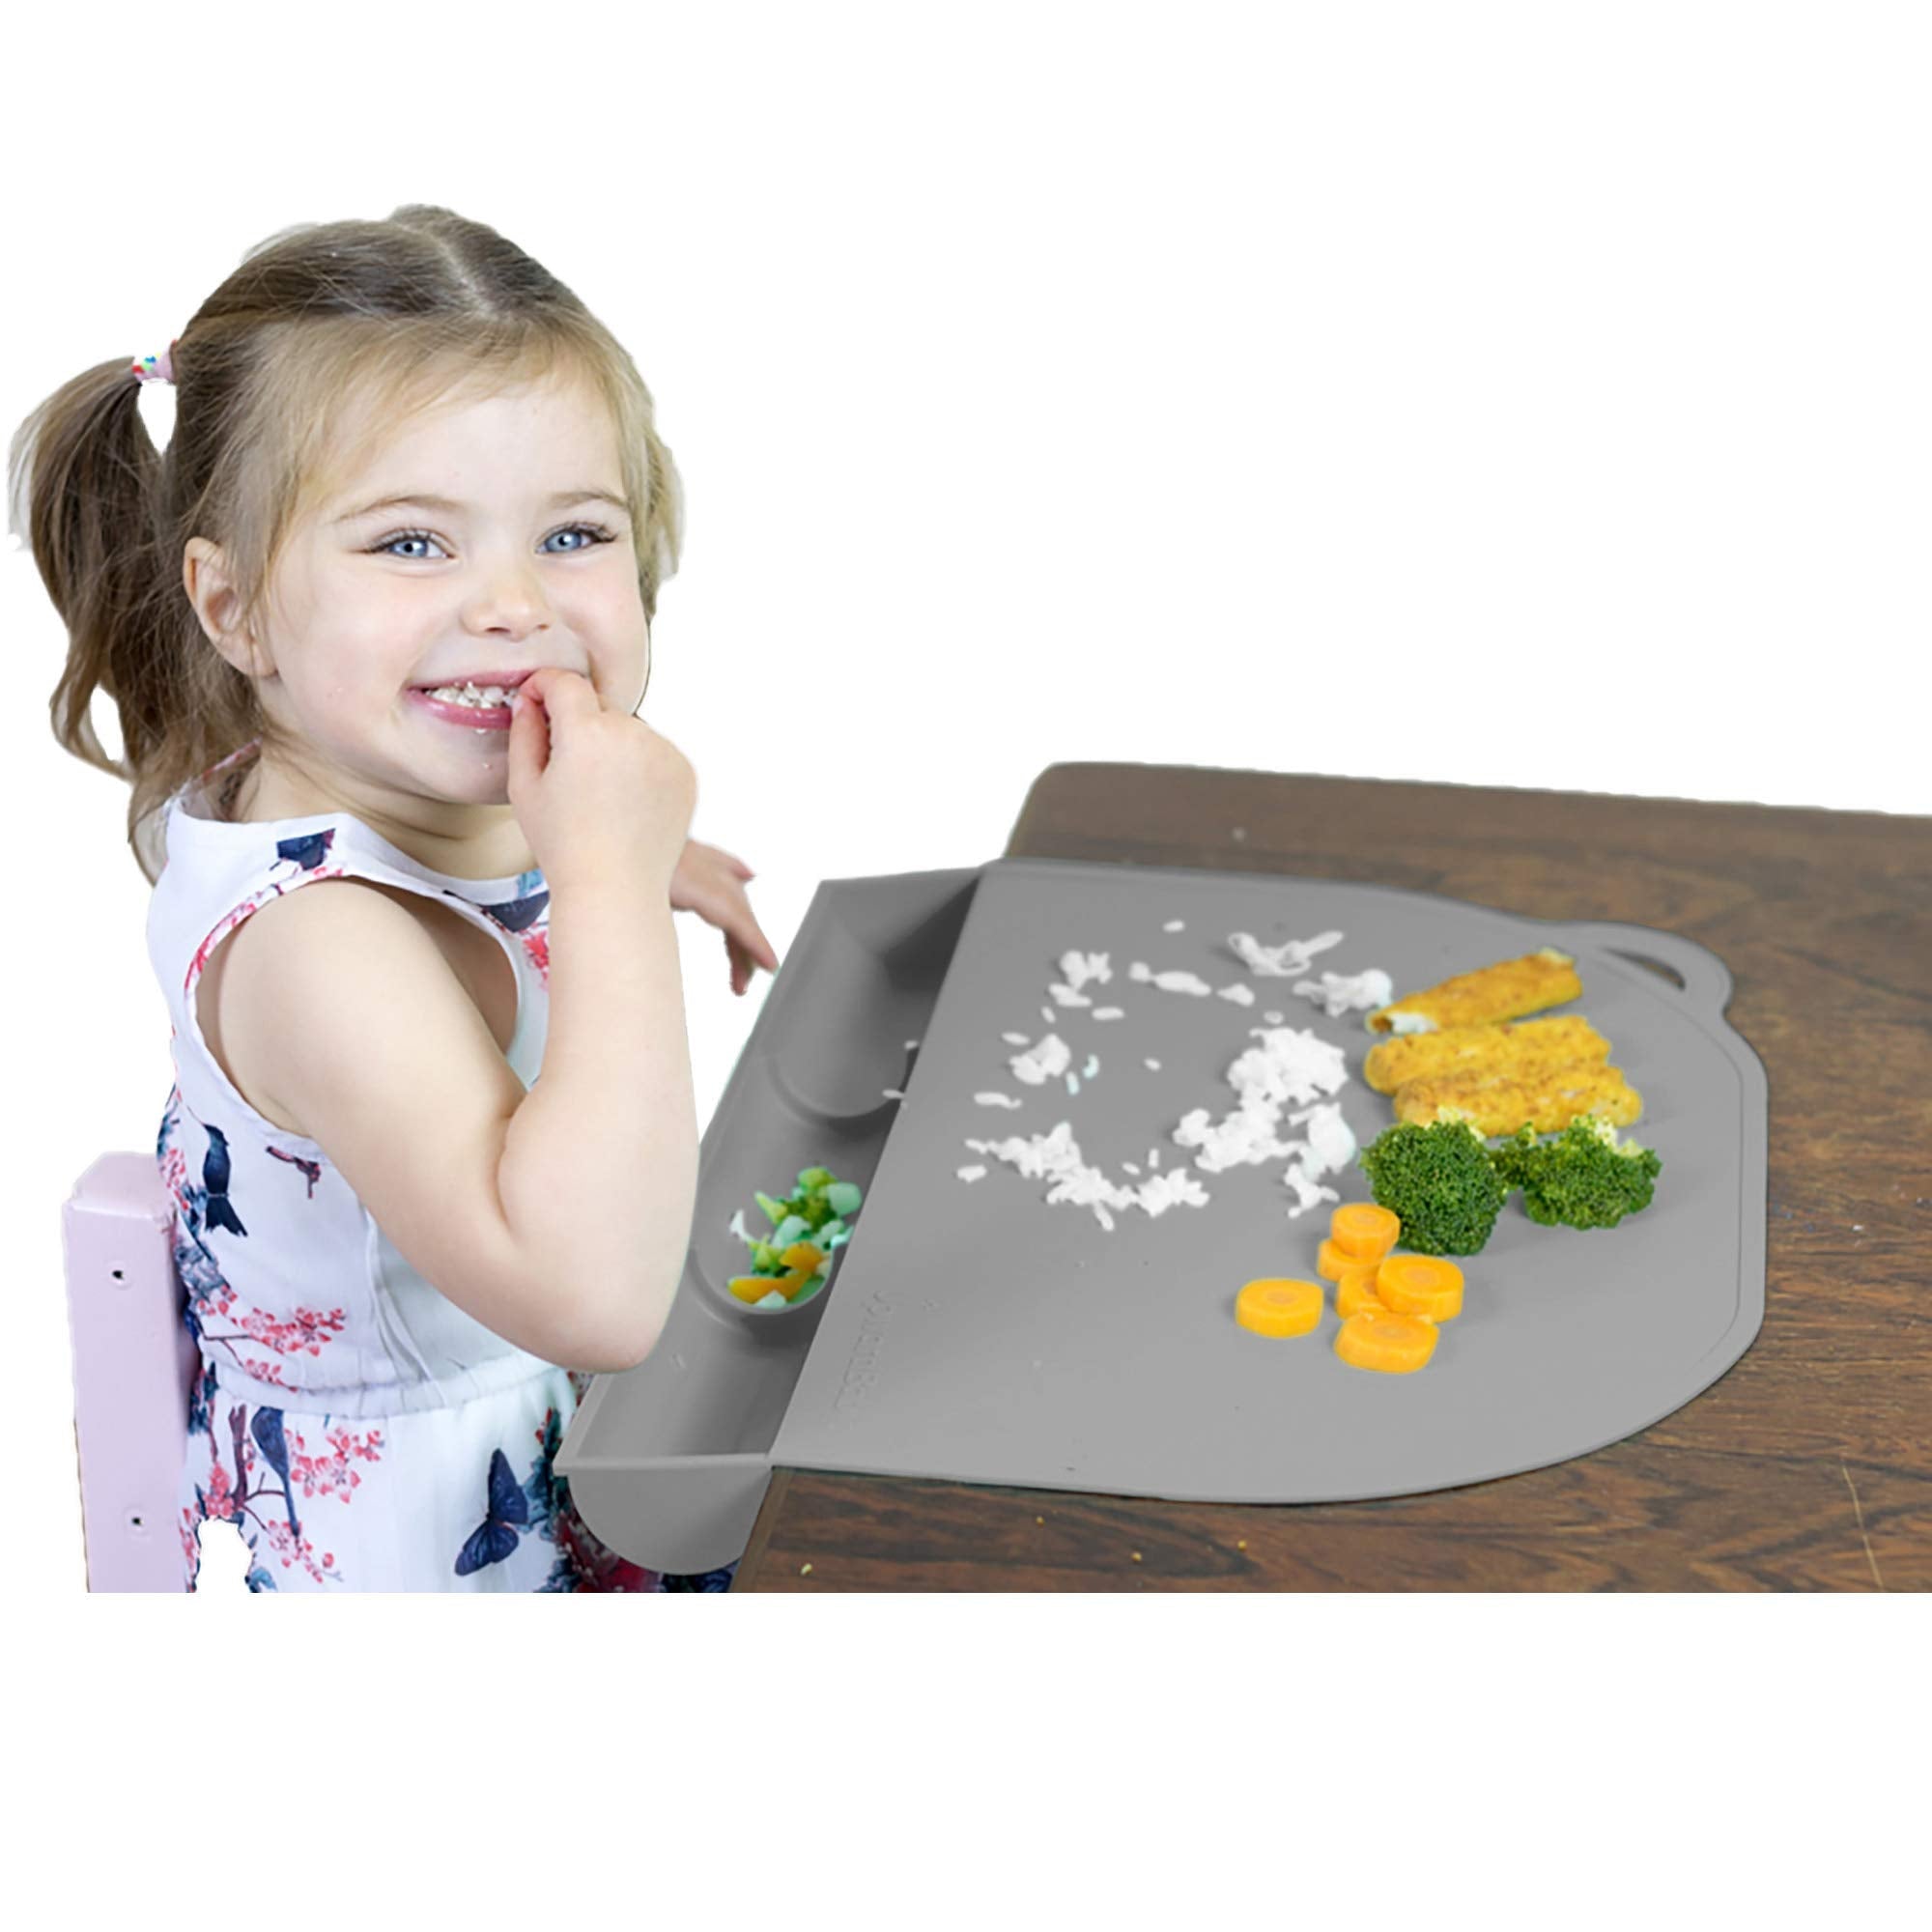 Food Catching Baby Placemat with Suction - UpwardBaby Gray Silicone Placemats for Kids Babies and Toddlers - Clean Mealtimes at Home or for